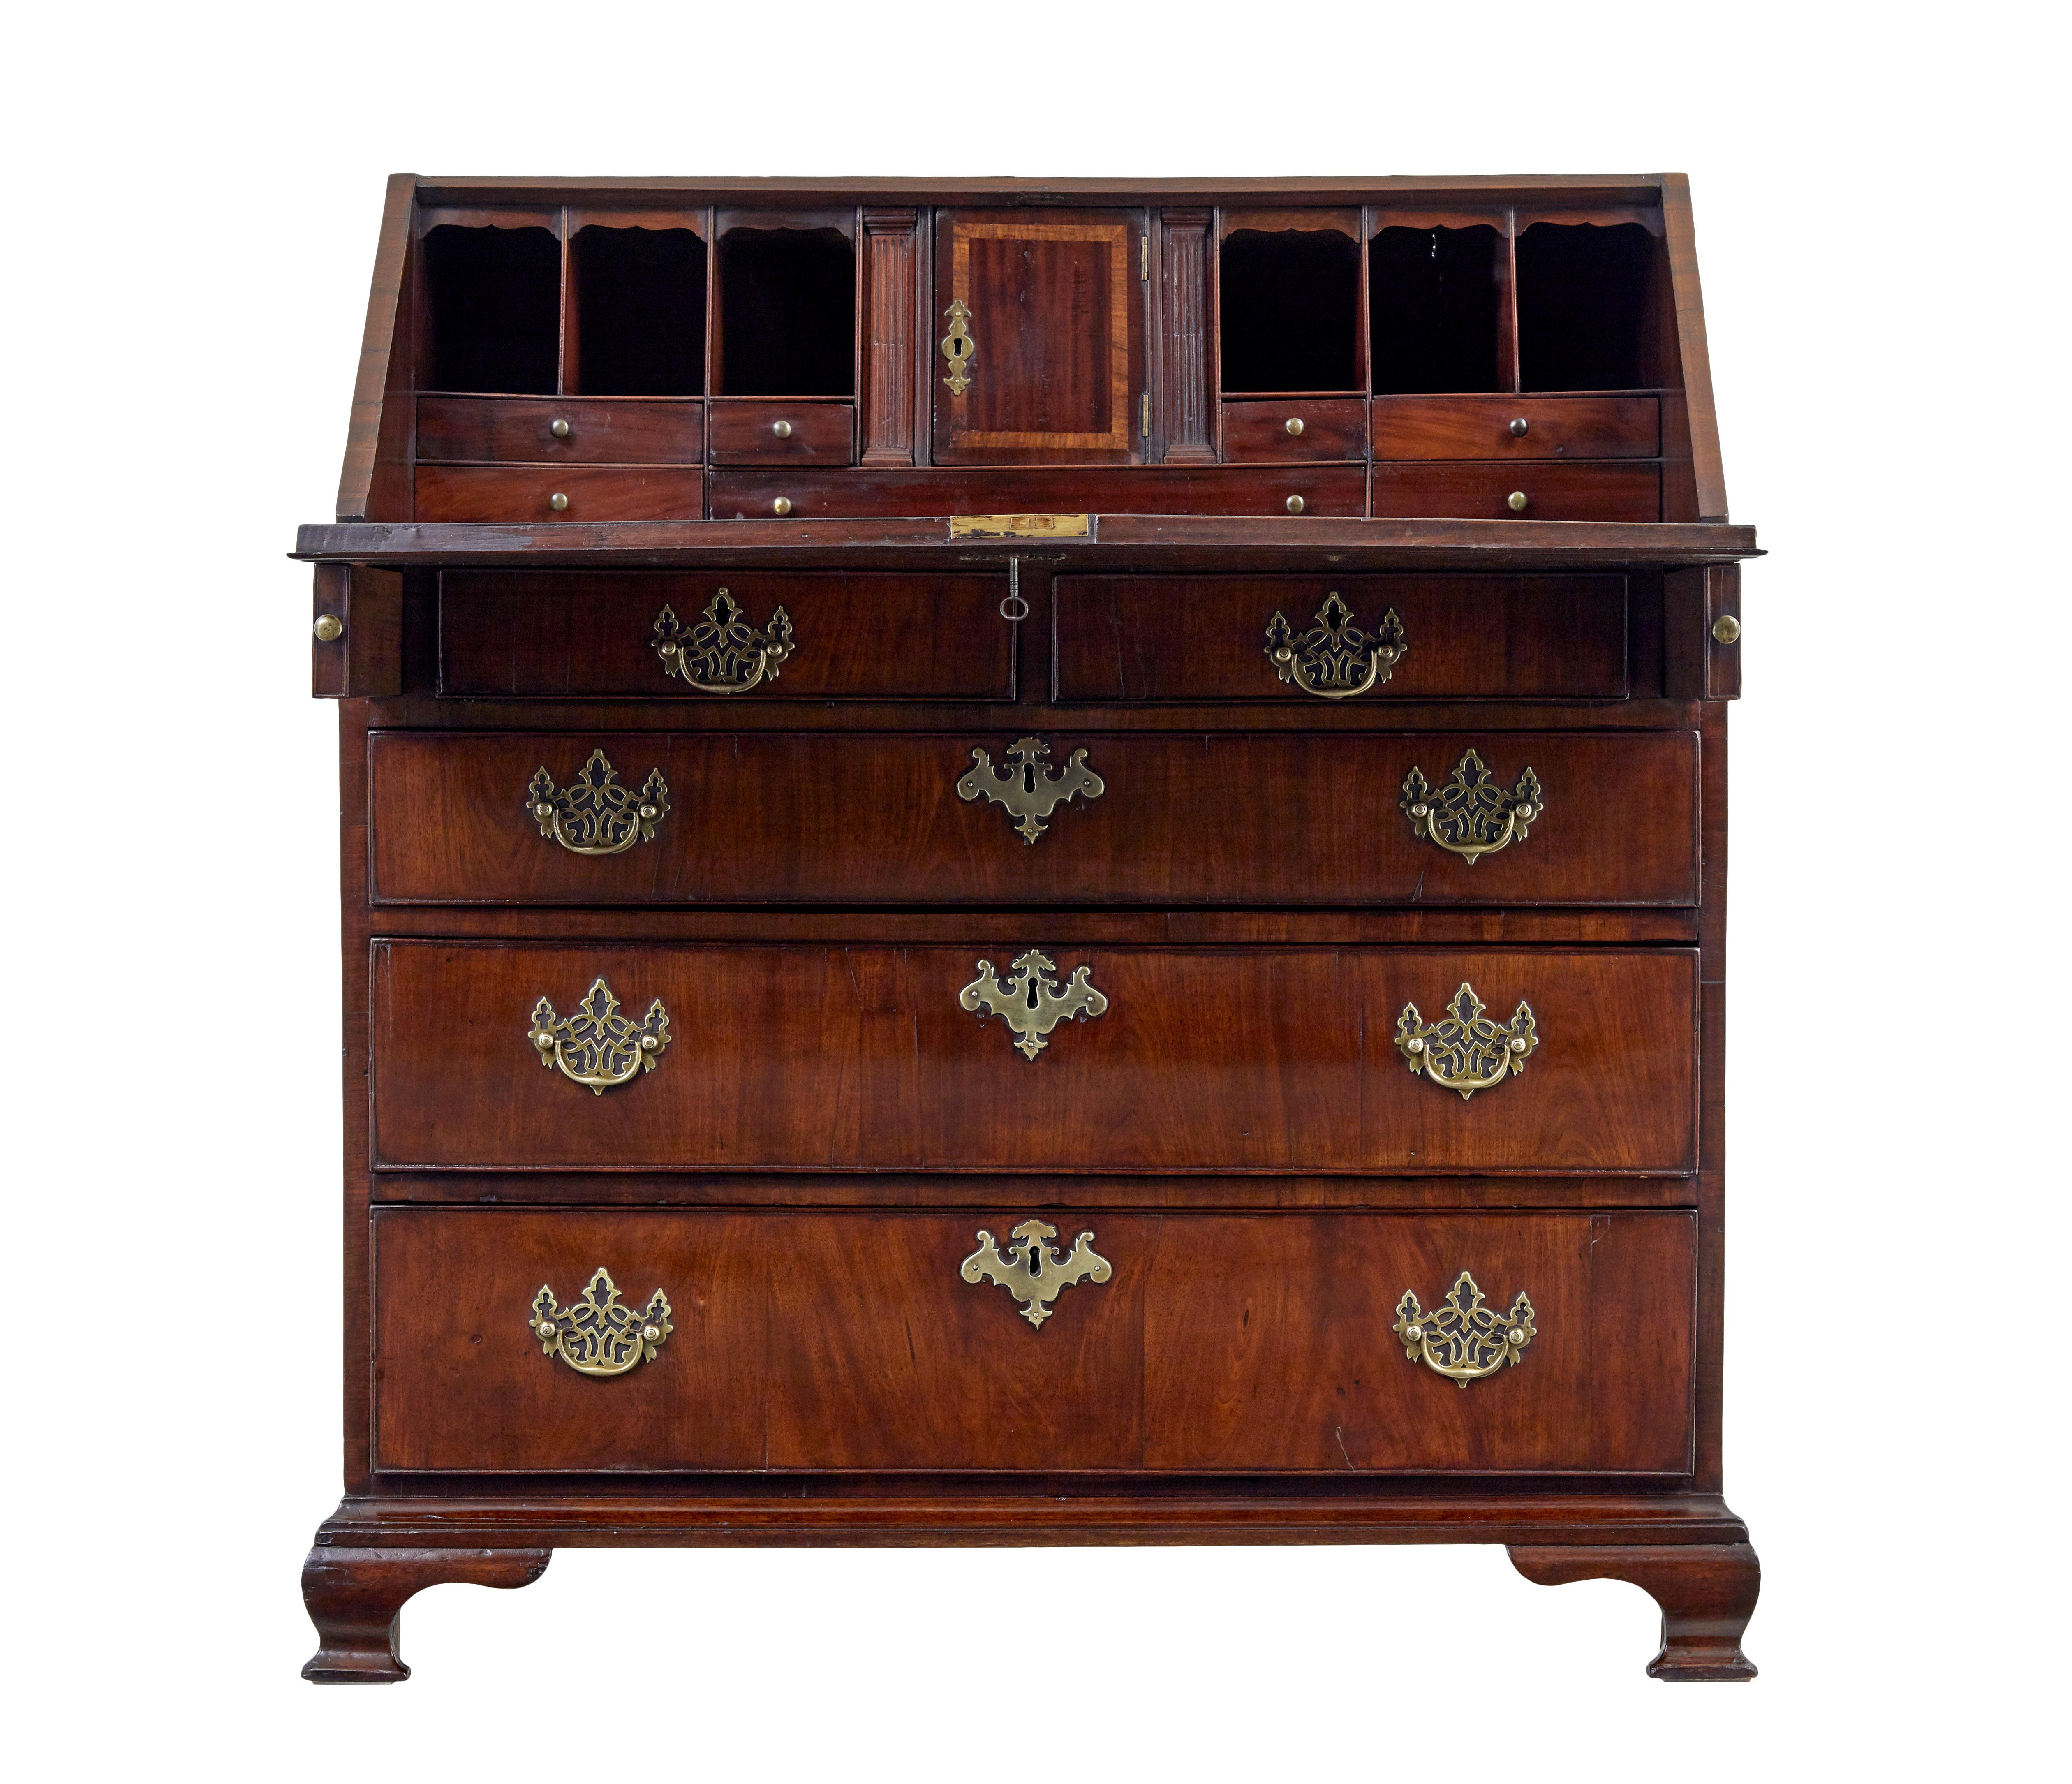 Late 18th century Georgian walnut bureau circa 1790.

Fine quality George III period walnut bureau, fitted with a fall and 2 over 3 drawers.

Fall drops down onto pull out slides to provide the writing surface, with an inset leather panel with gold